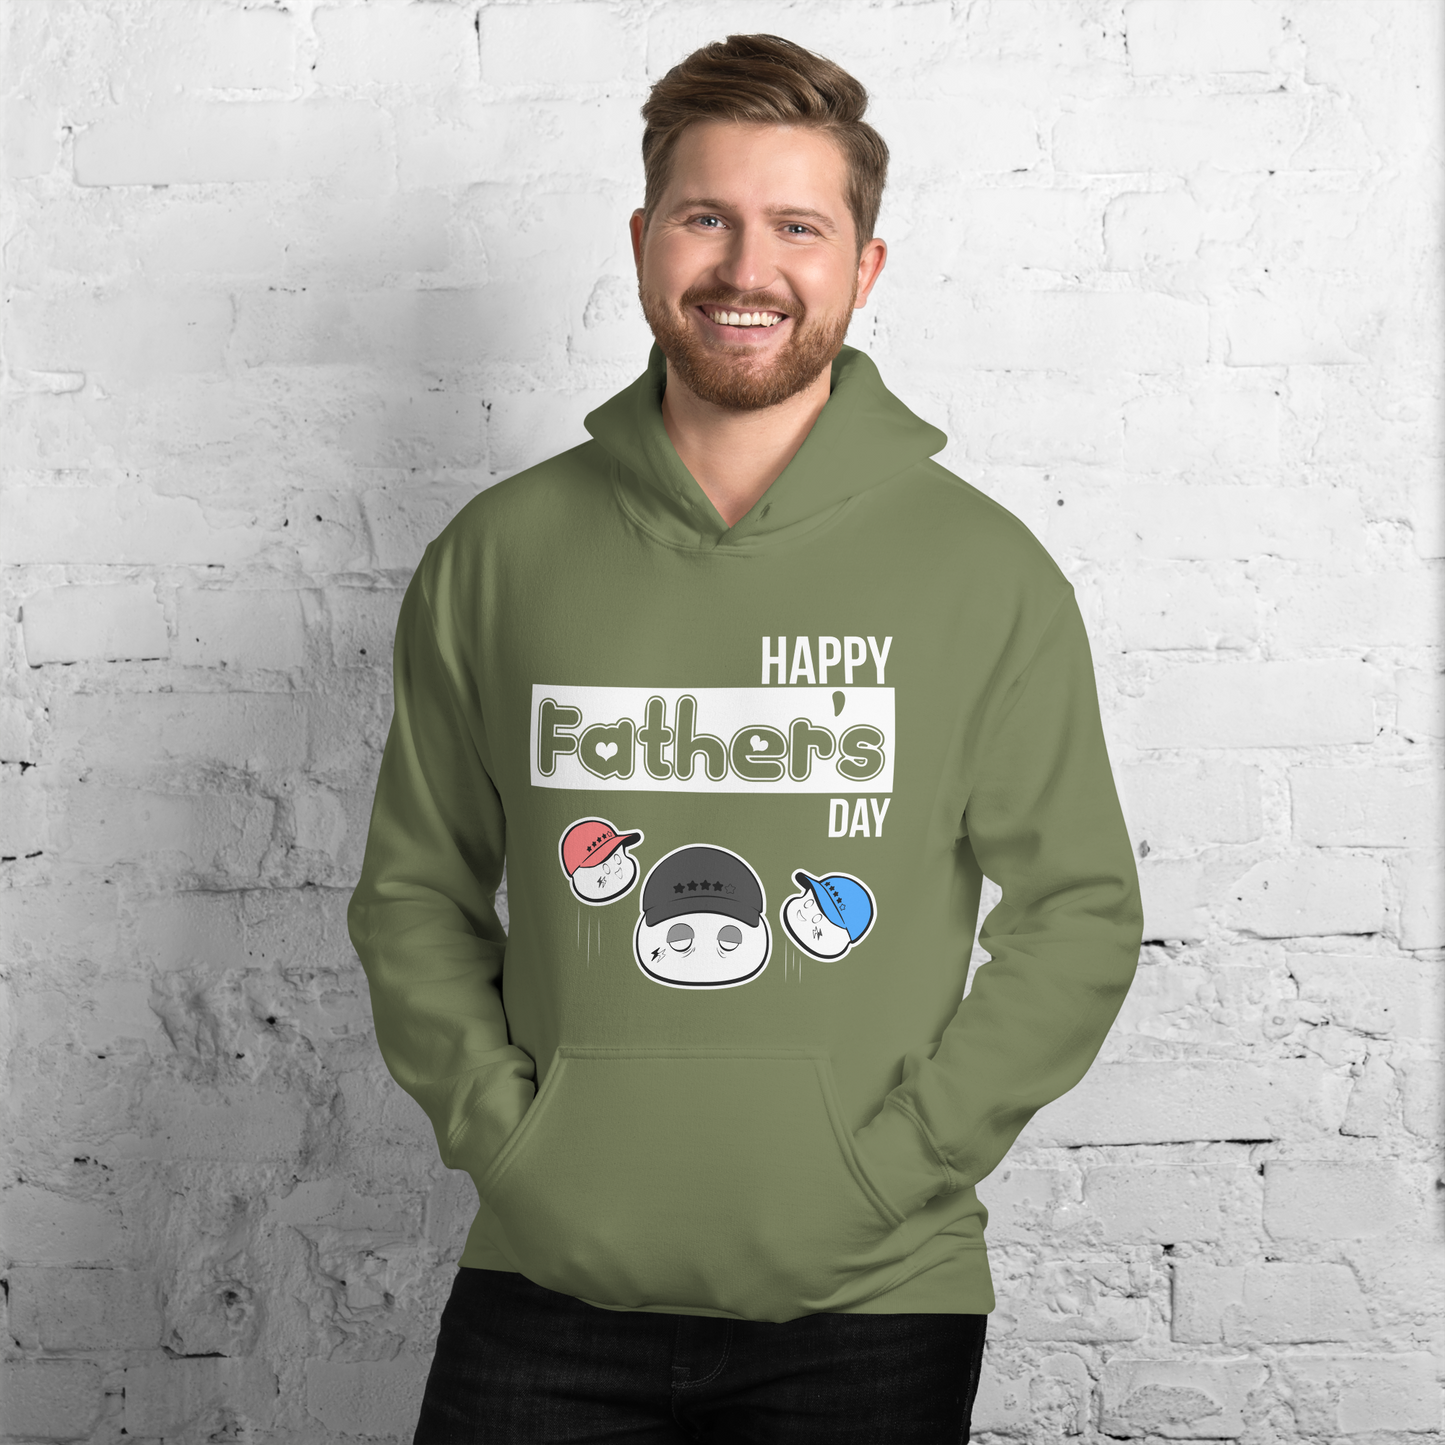 Happy Father's Day - Unisex Hoodie